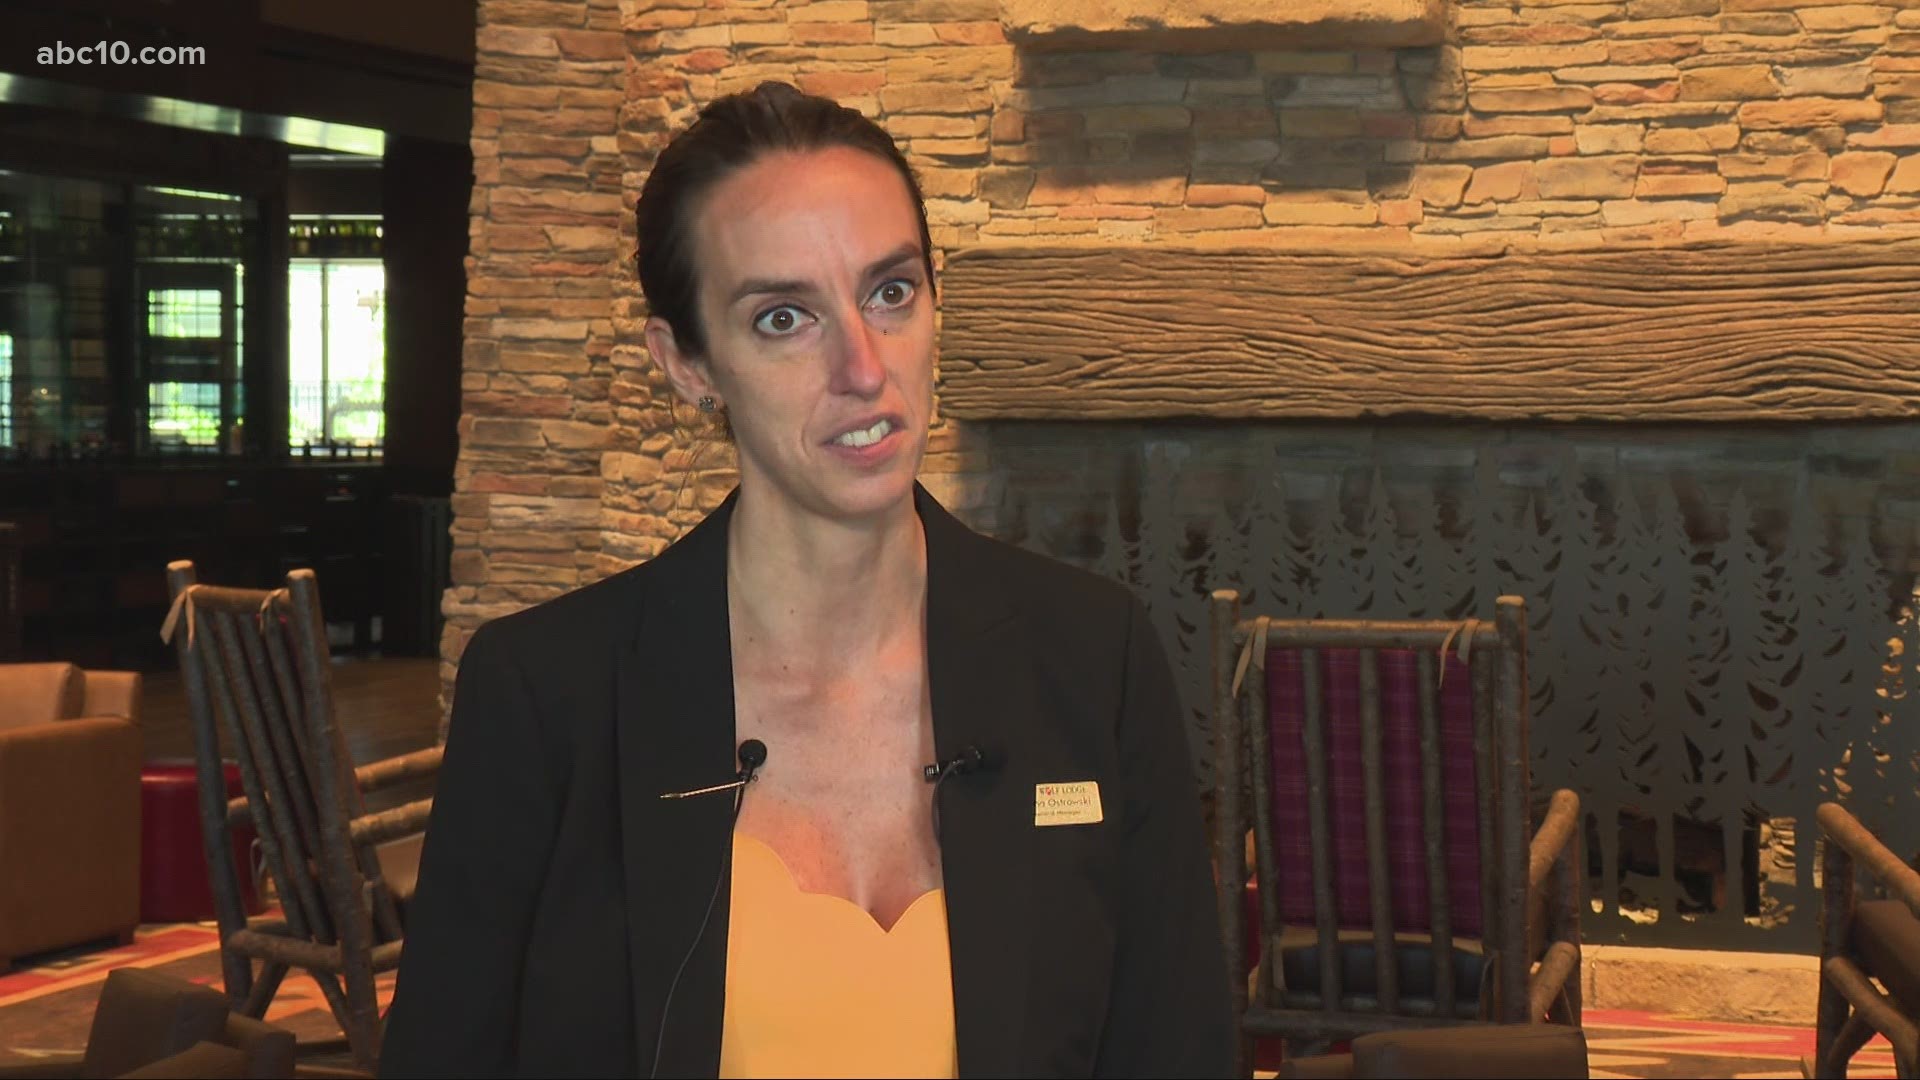 Lena Howland was in Manteca at a Great Wolf Lodge location, where she was given an inside look at what guests can expect when the water park opens.